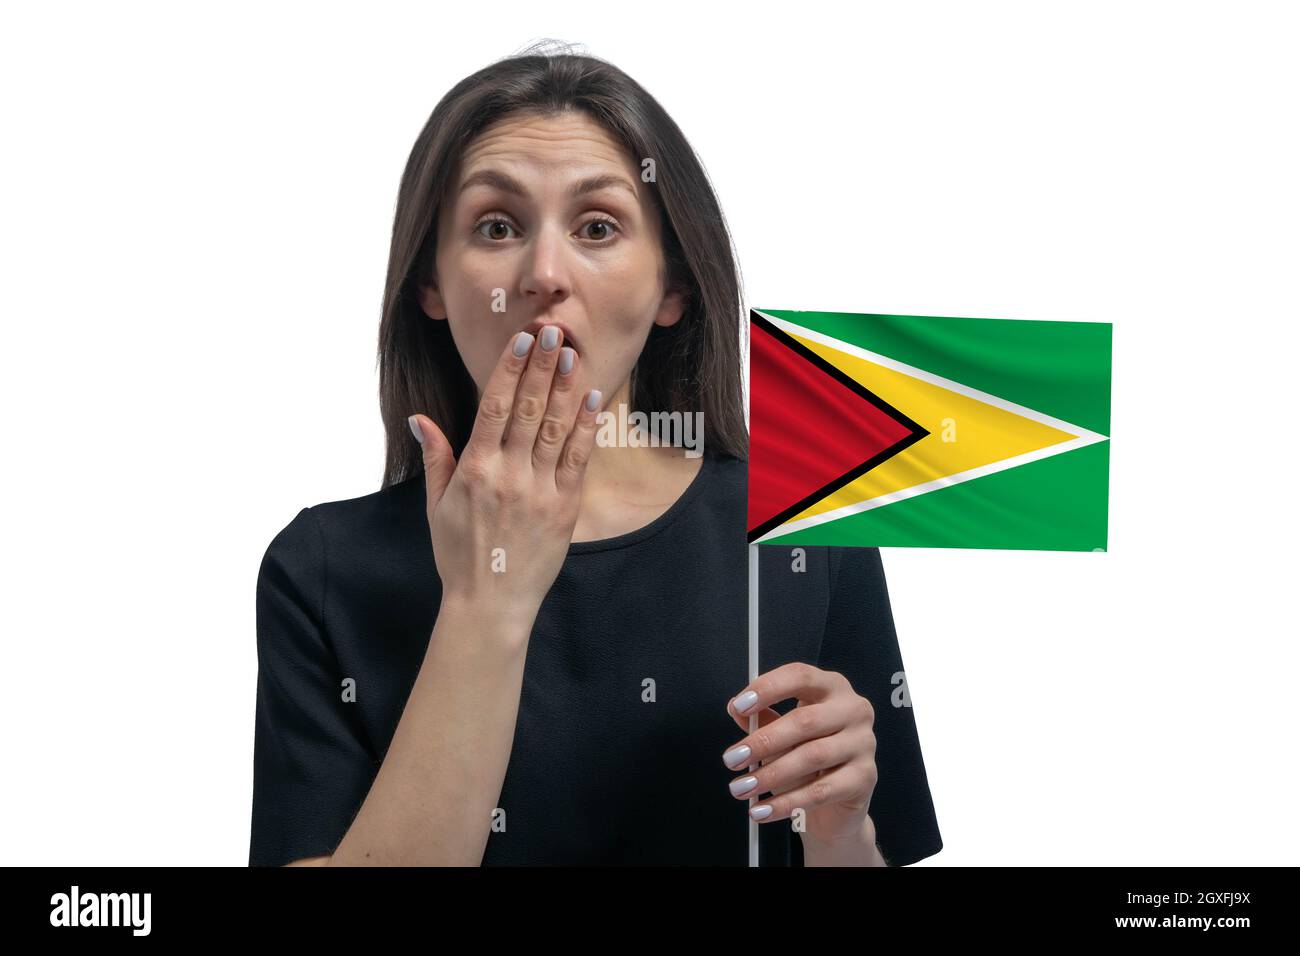 Happy young white woman holding flag of Guyana and covers her mouth with her hand isolated on a white background. Stock Photo